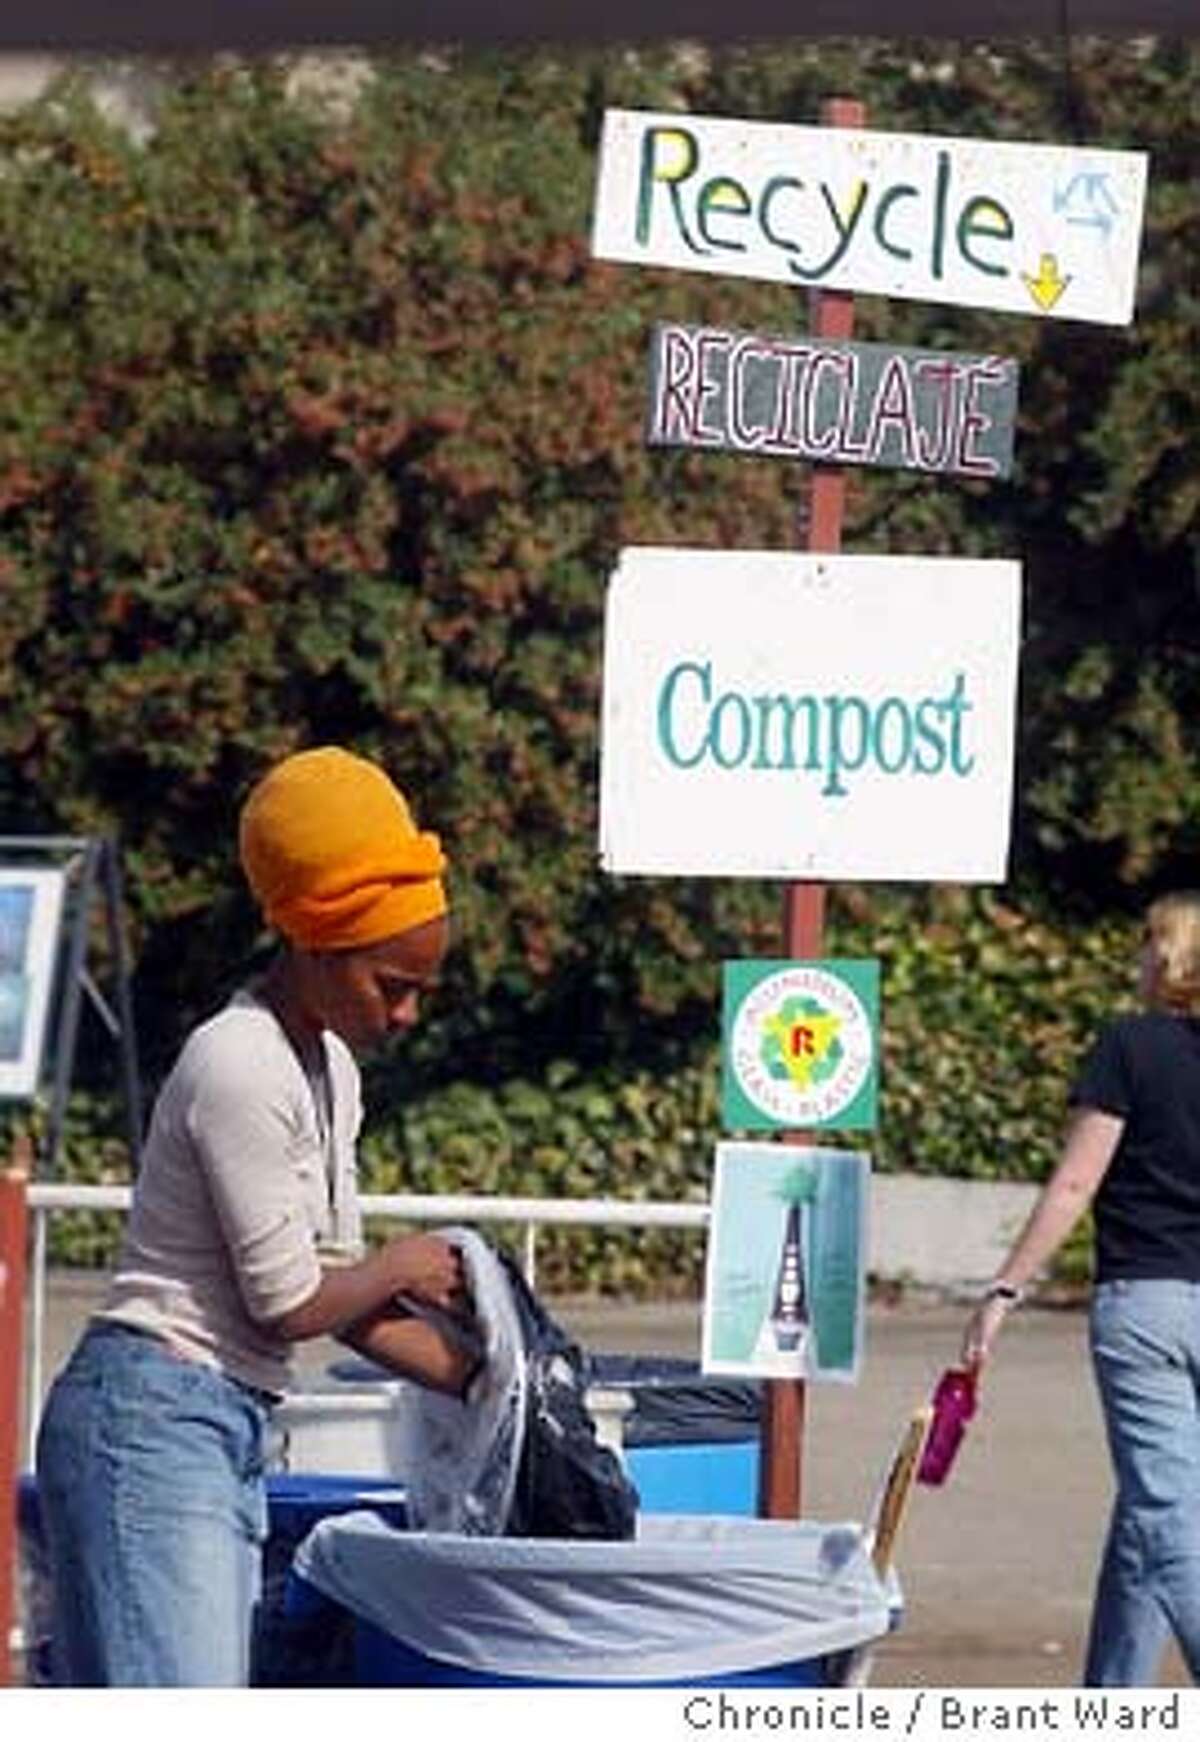 bioneers009_bw.jpg The Bioneers conference was held at the Marin County Civic Center over the weekend. These "biological pioneers" gather to discuss the link between humans and nature. Here Ratoya Pilgrim recycled her waste from her hotel in a number of carefully marked recycle bins scattered around the conference. BRANT WARD / The Chronicle MANDATORY CREDIT FOR PHOTOG AND SF CHRONICLE/ -MAGS OUT